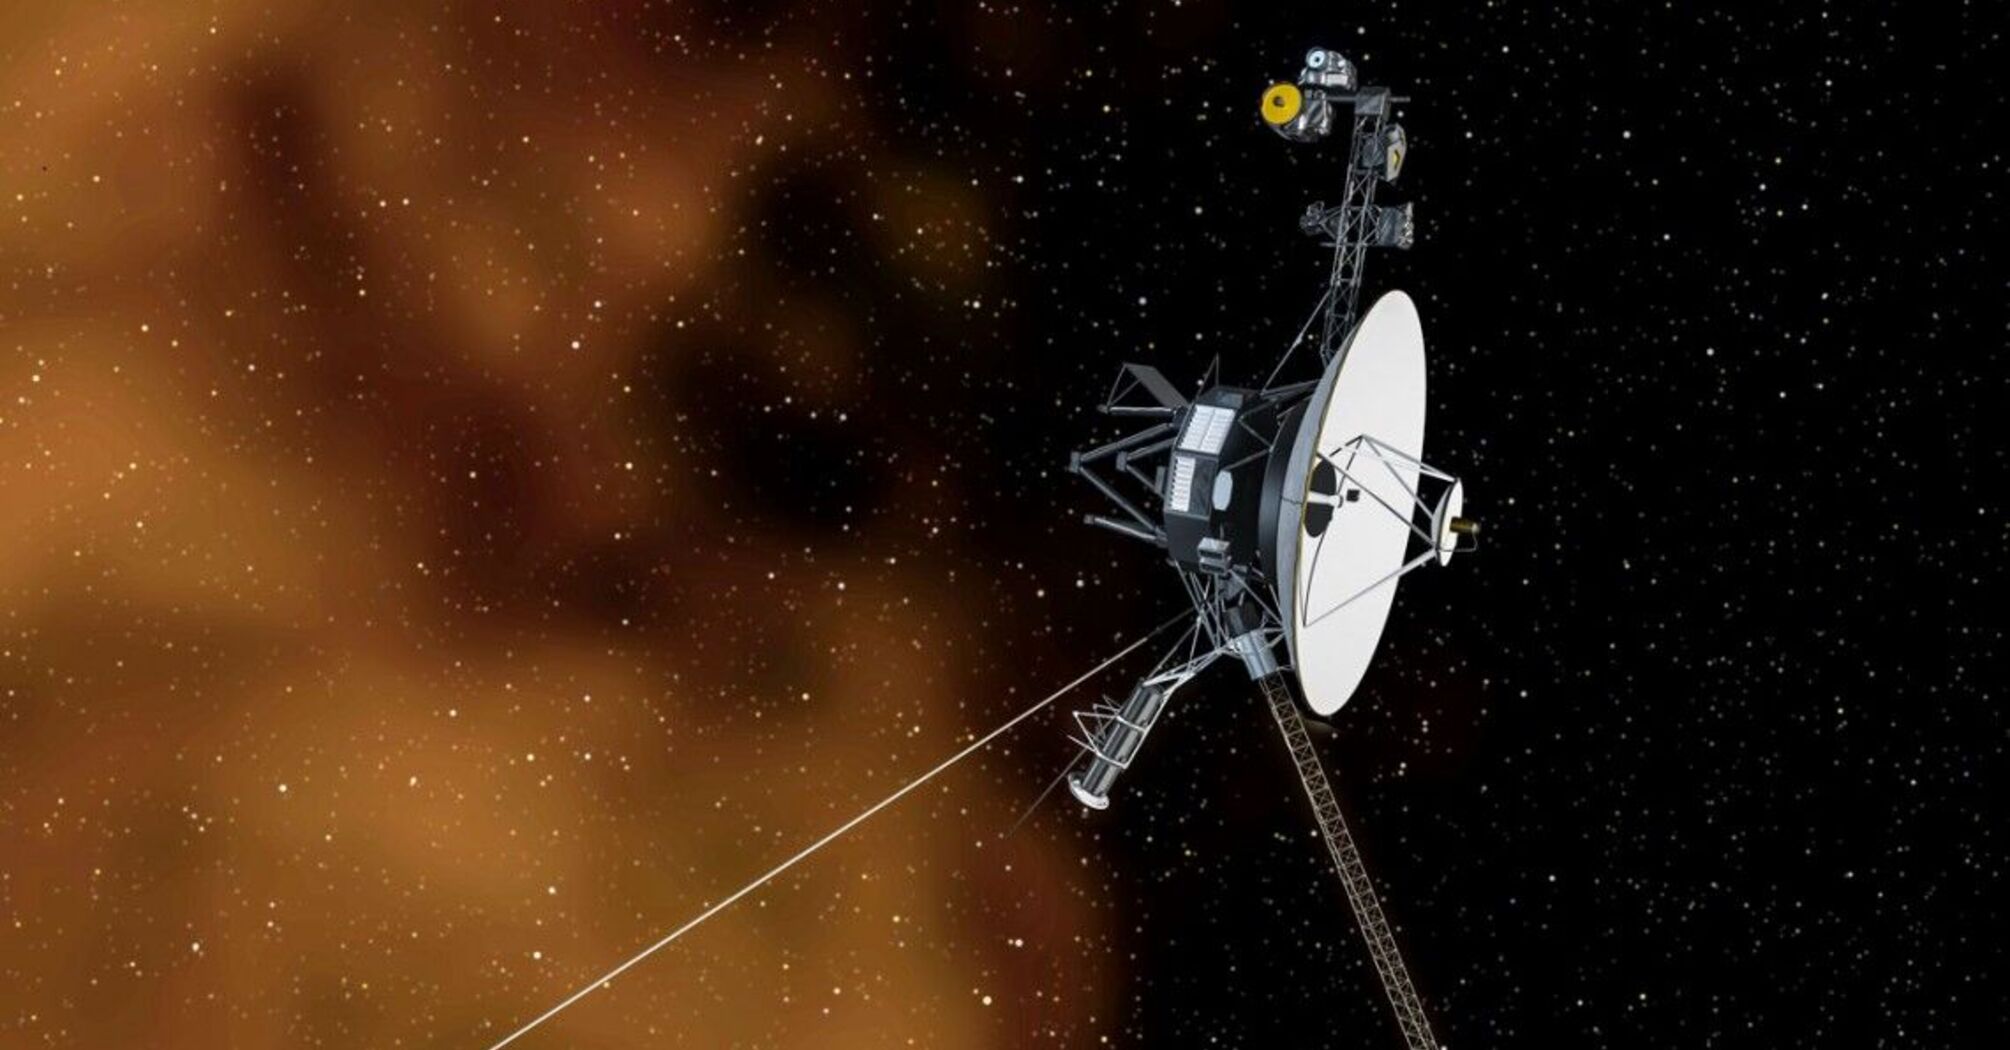 NASA is no longer receiving signals from the Voyager 1